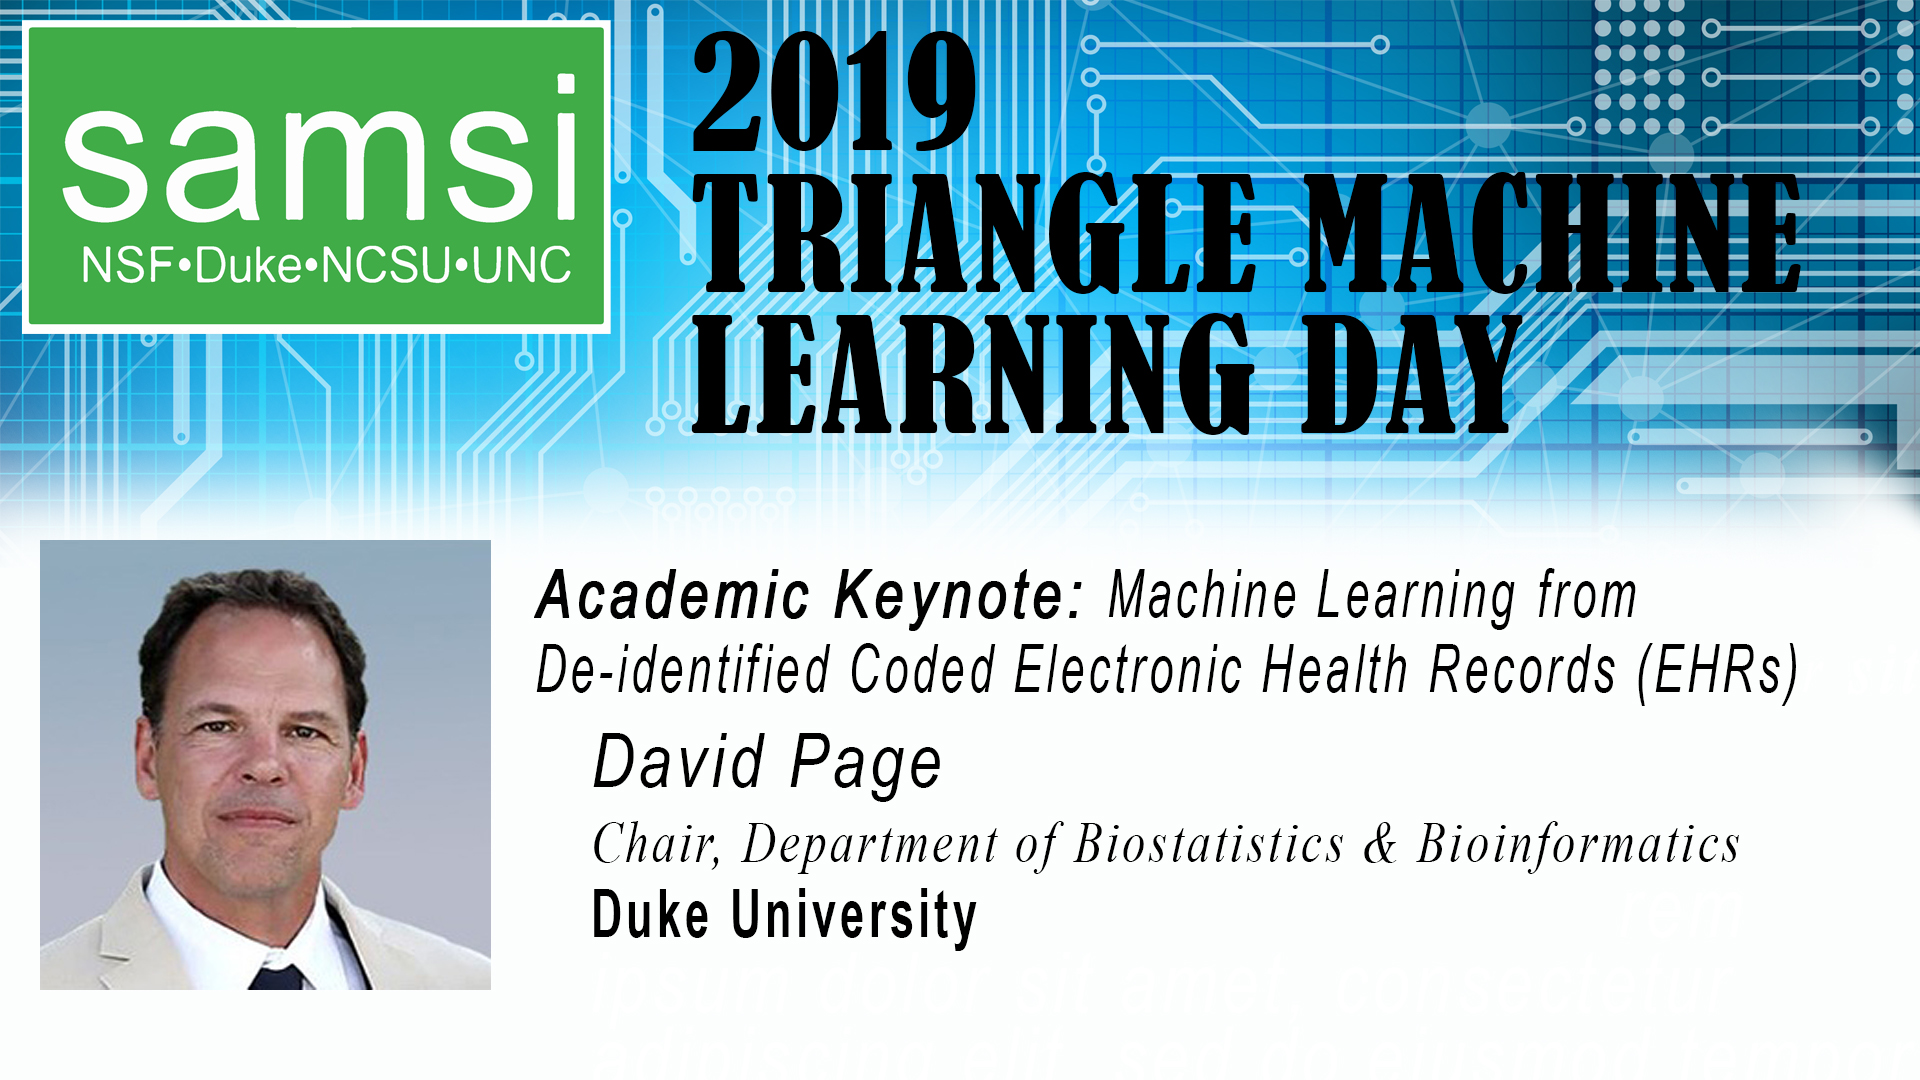 Deep Learning: Triangle Machine Learning Day - Machine Learning from De-IdentifiedCoded Electronic Health Records (EHRs), David Page Thumbnail